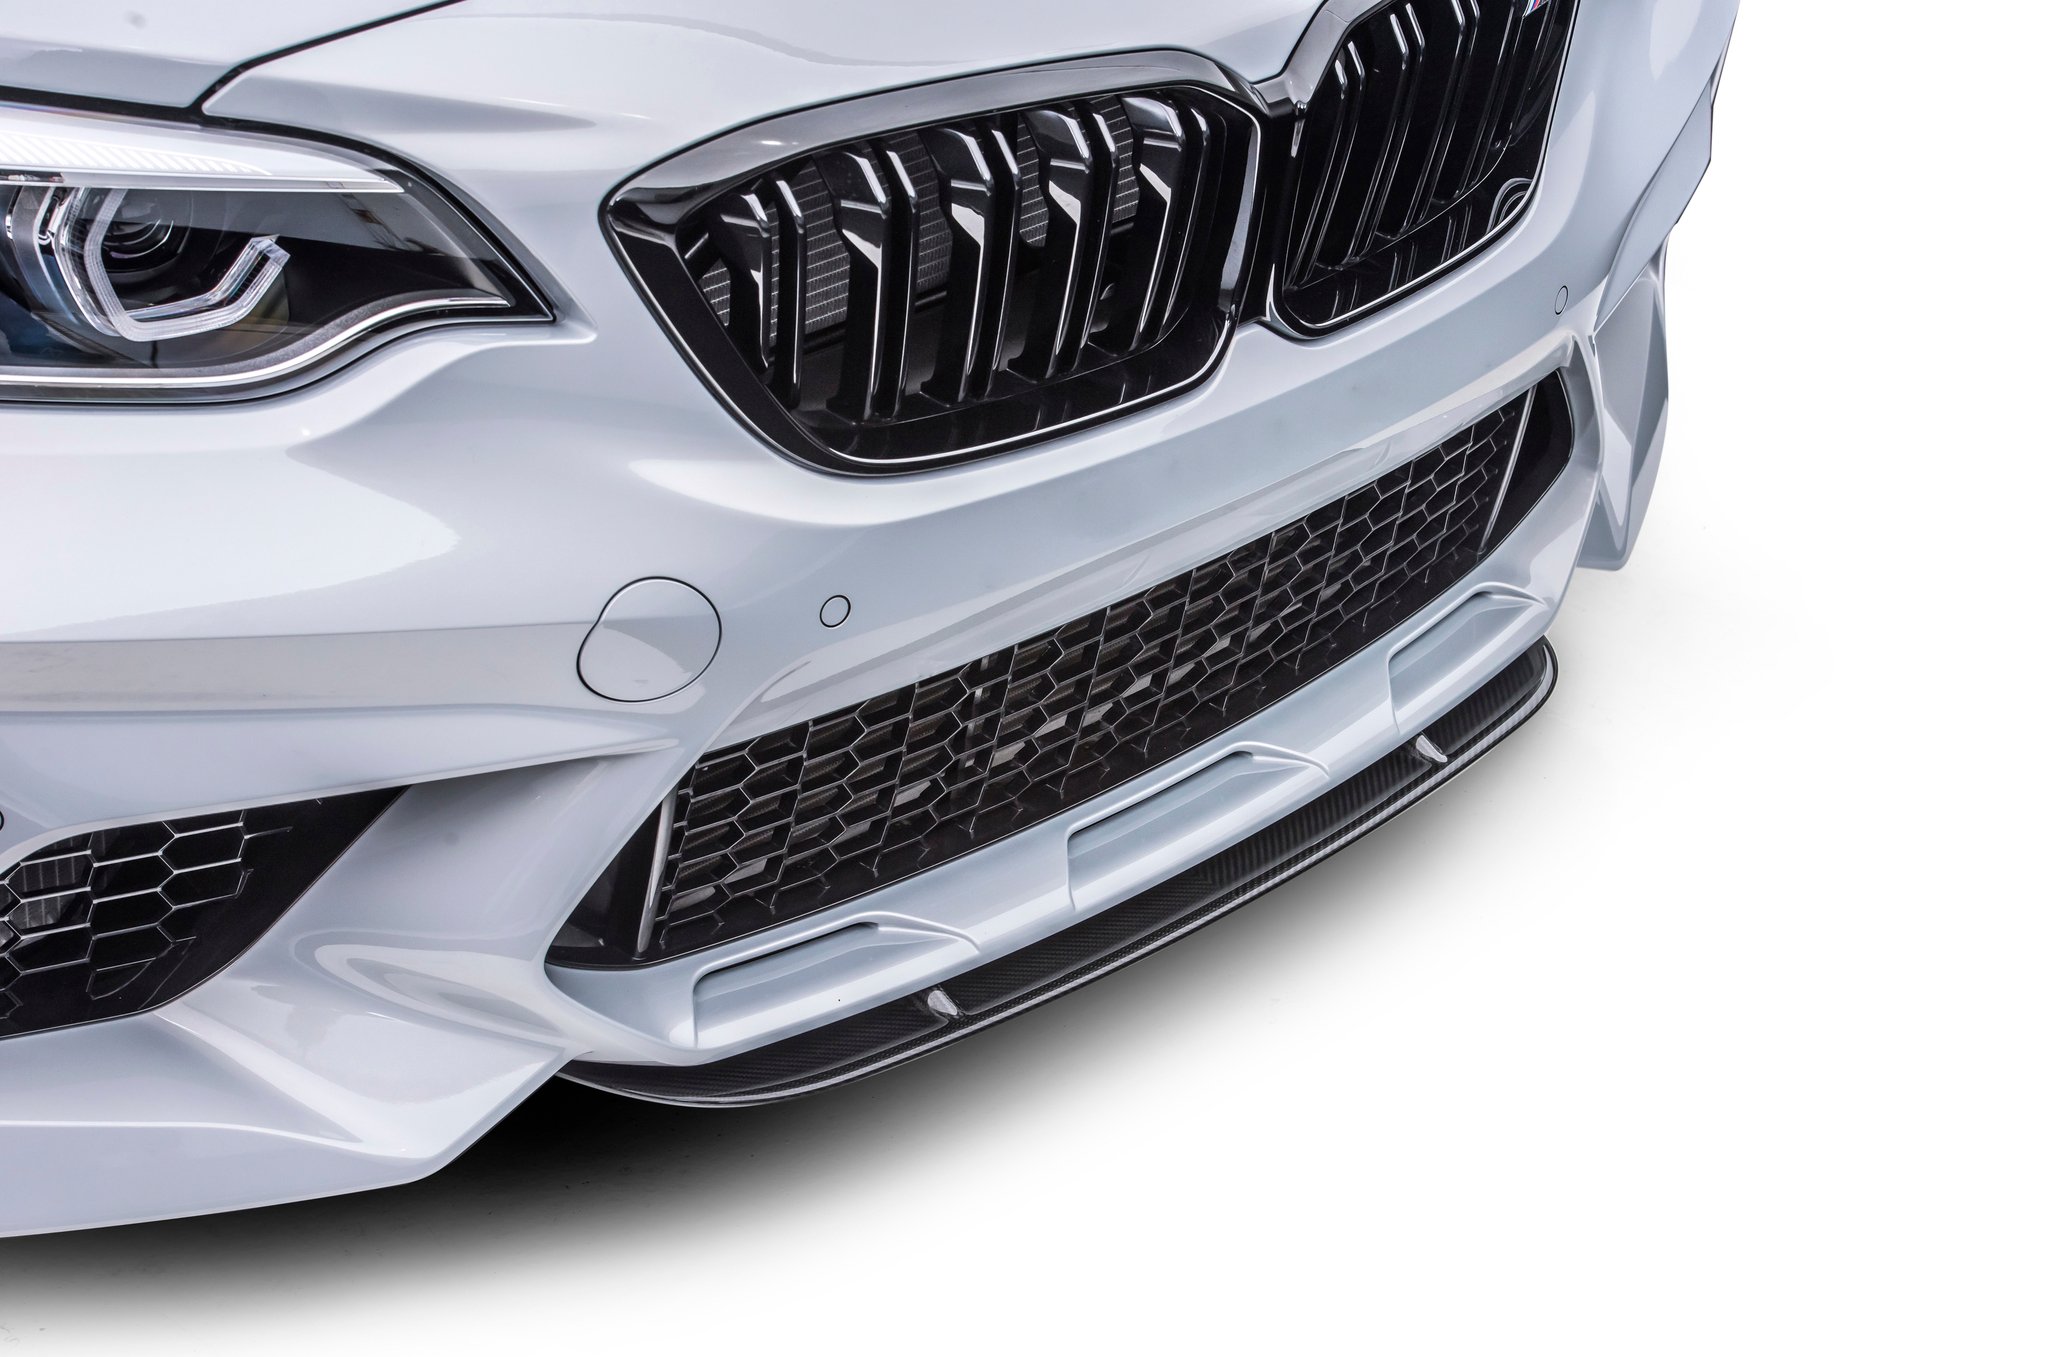 Sterckenn Carbon Fiber front splitter for BMW M2 Competition new style